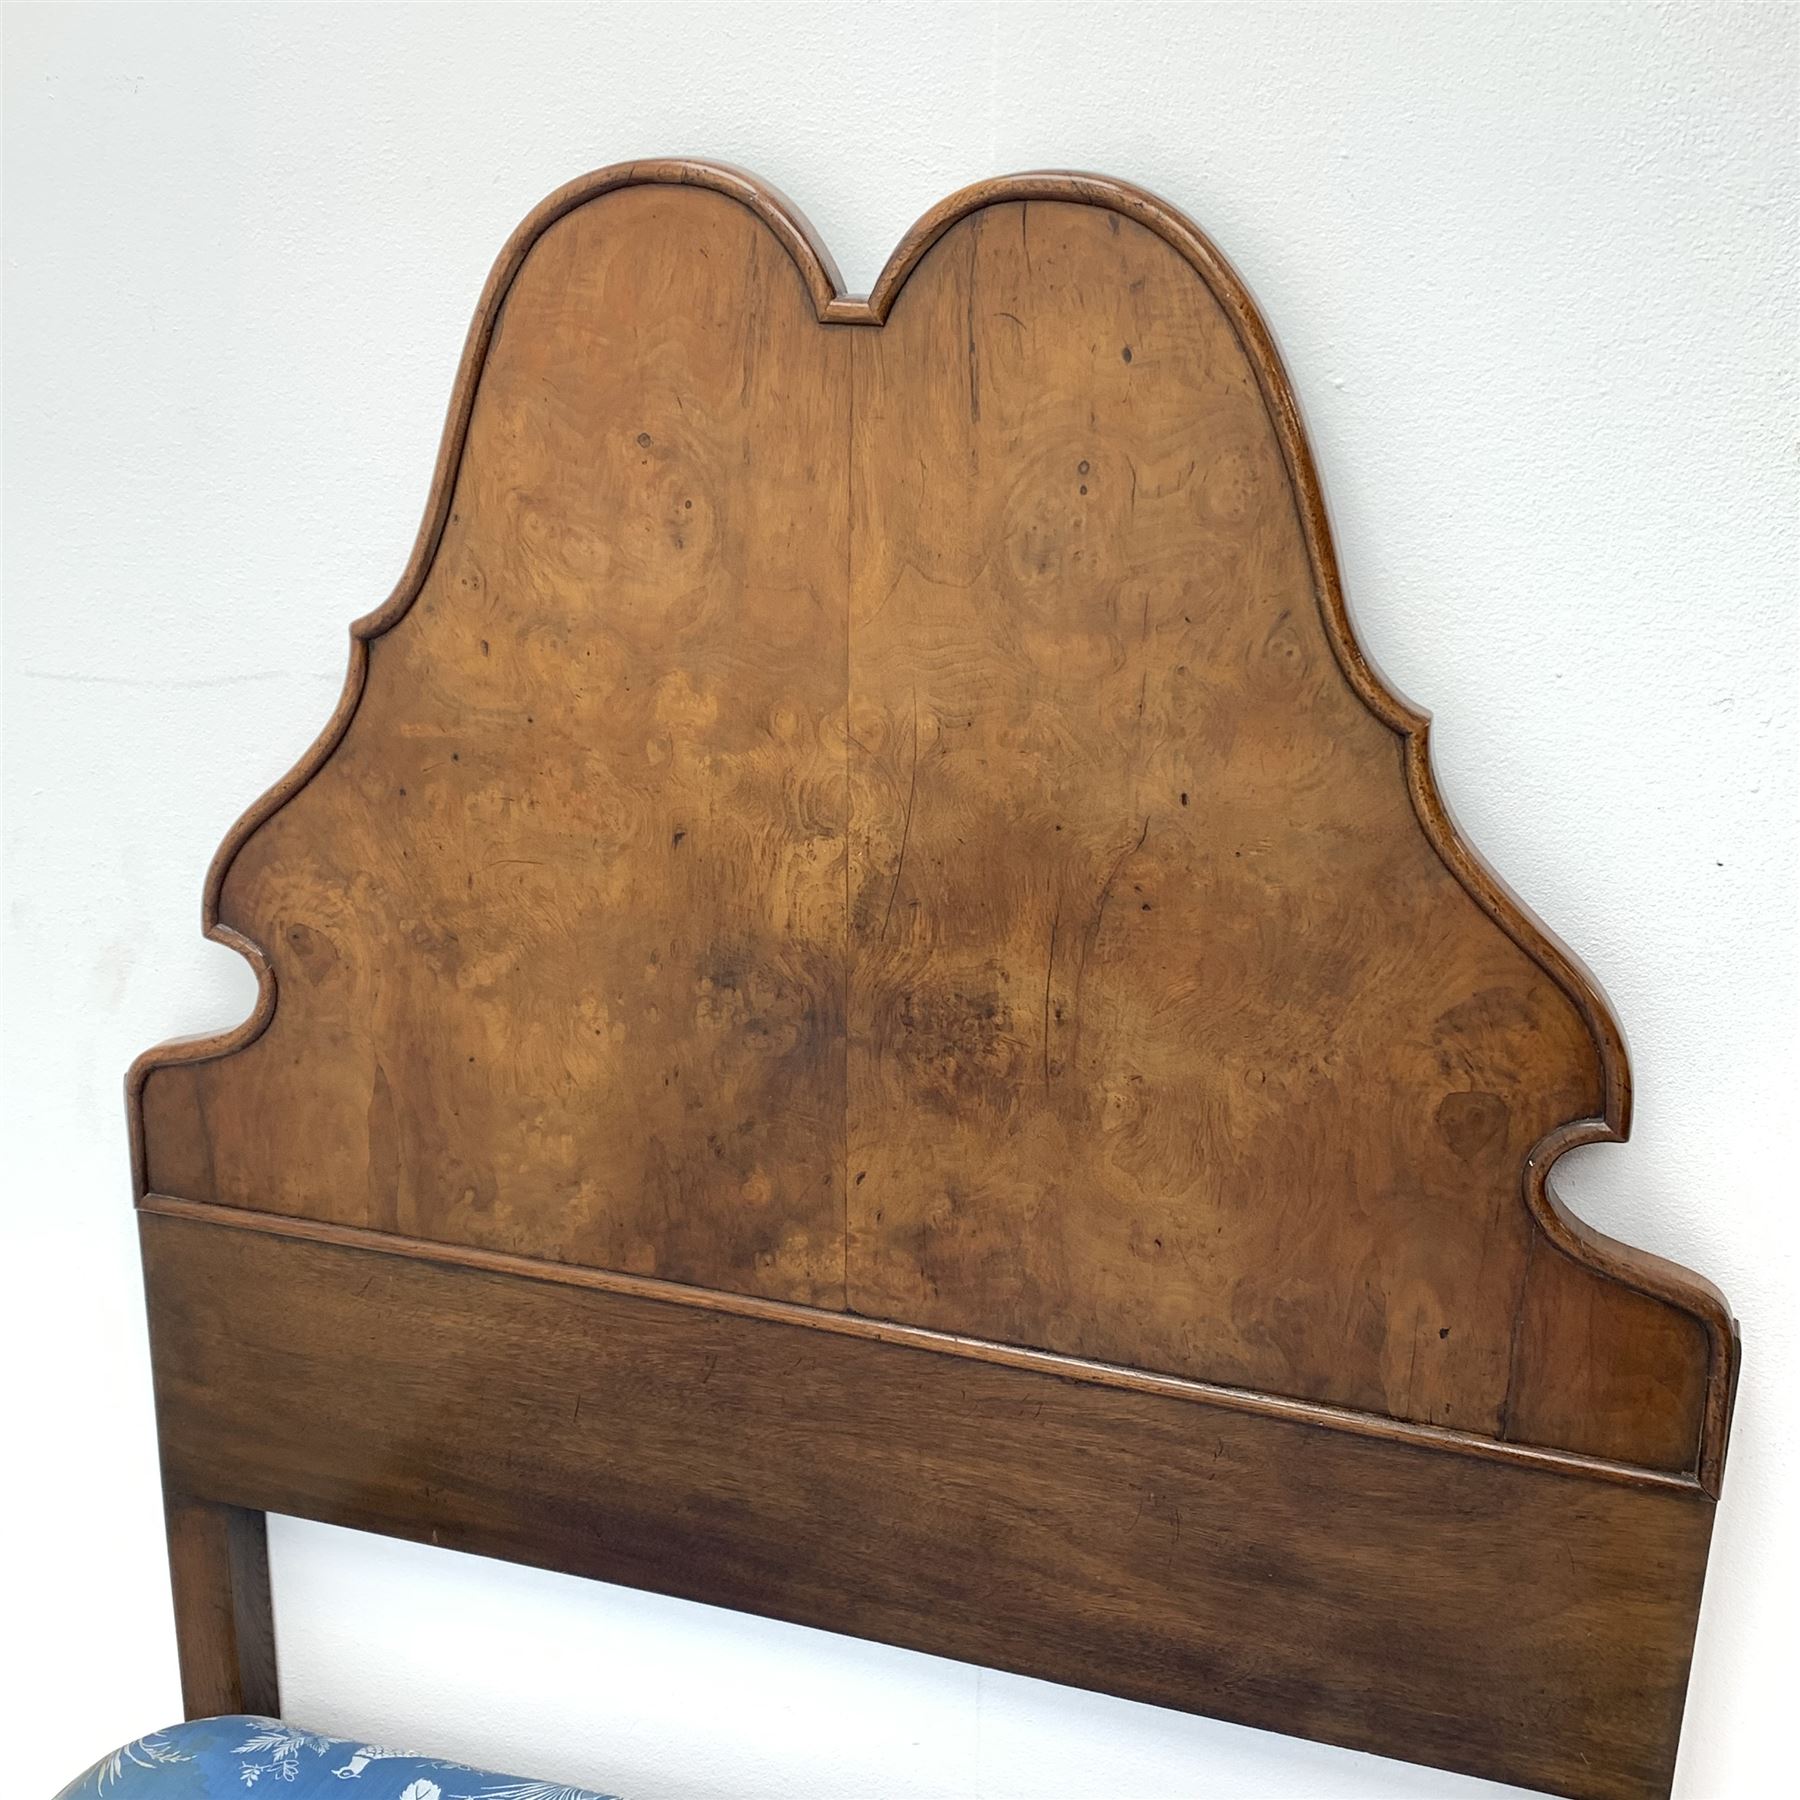 Pair 20th century walnut single 3' bedsteads, shaped and figured headboards, the footboards with scr - Image 6 of 9